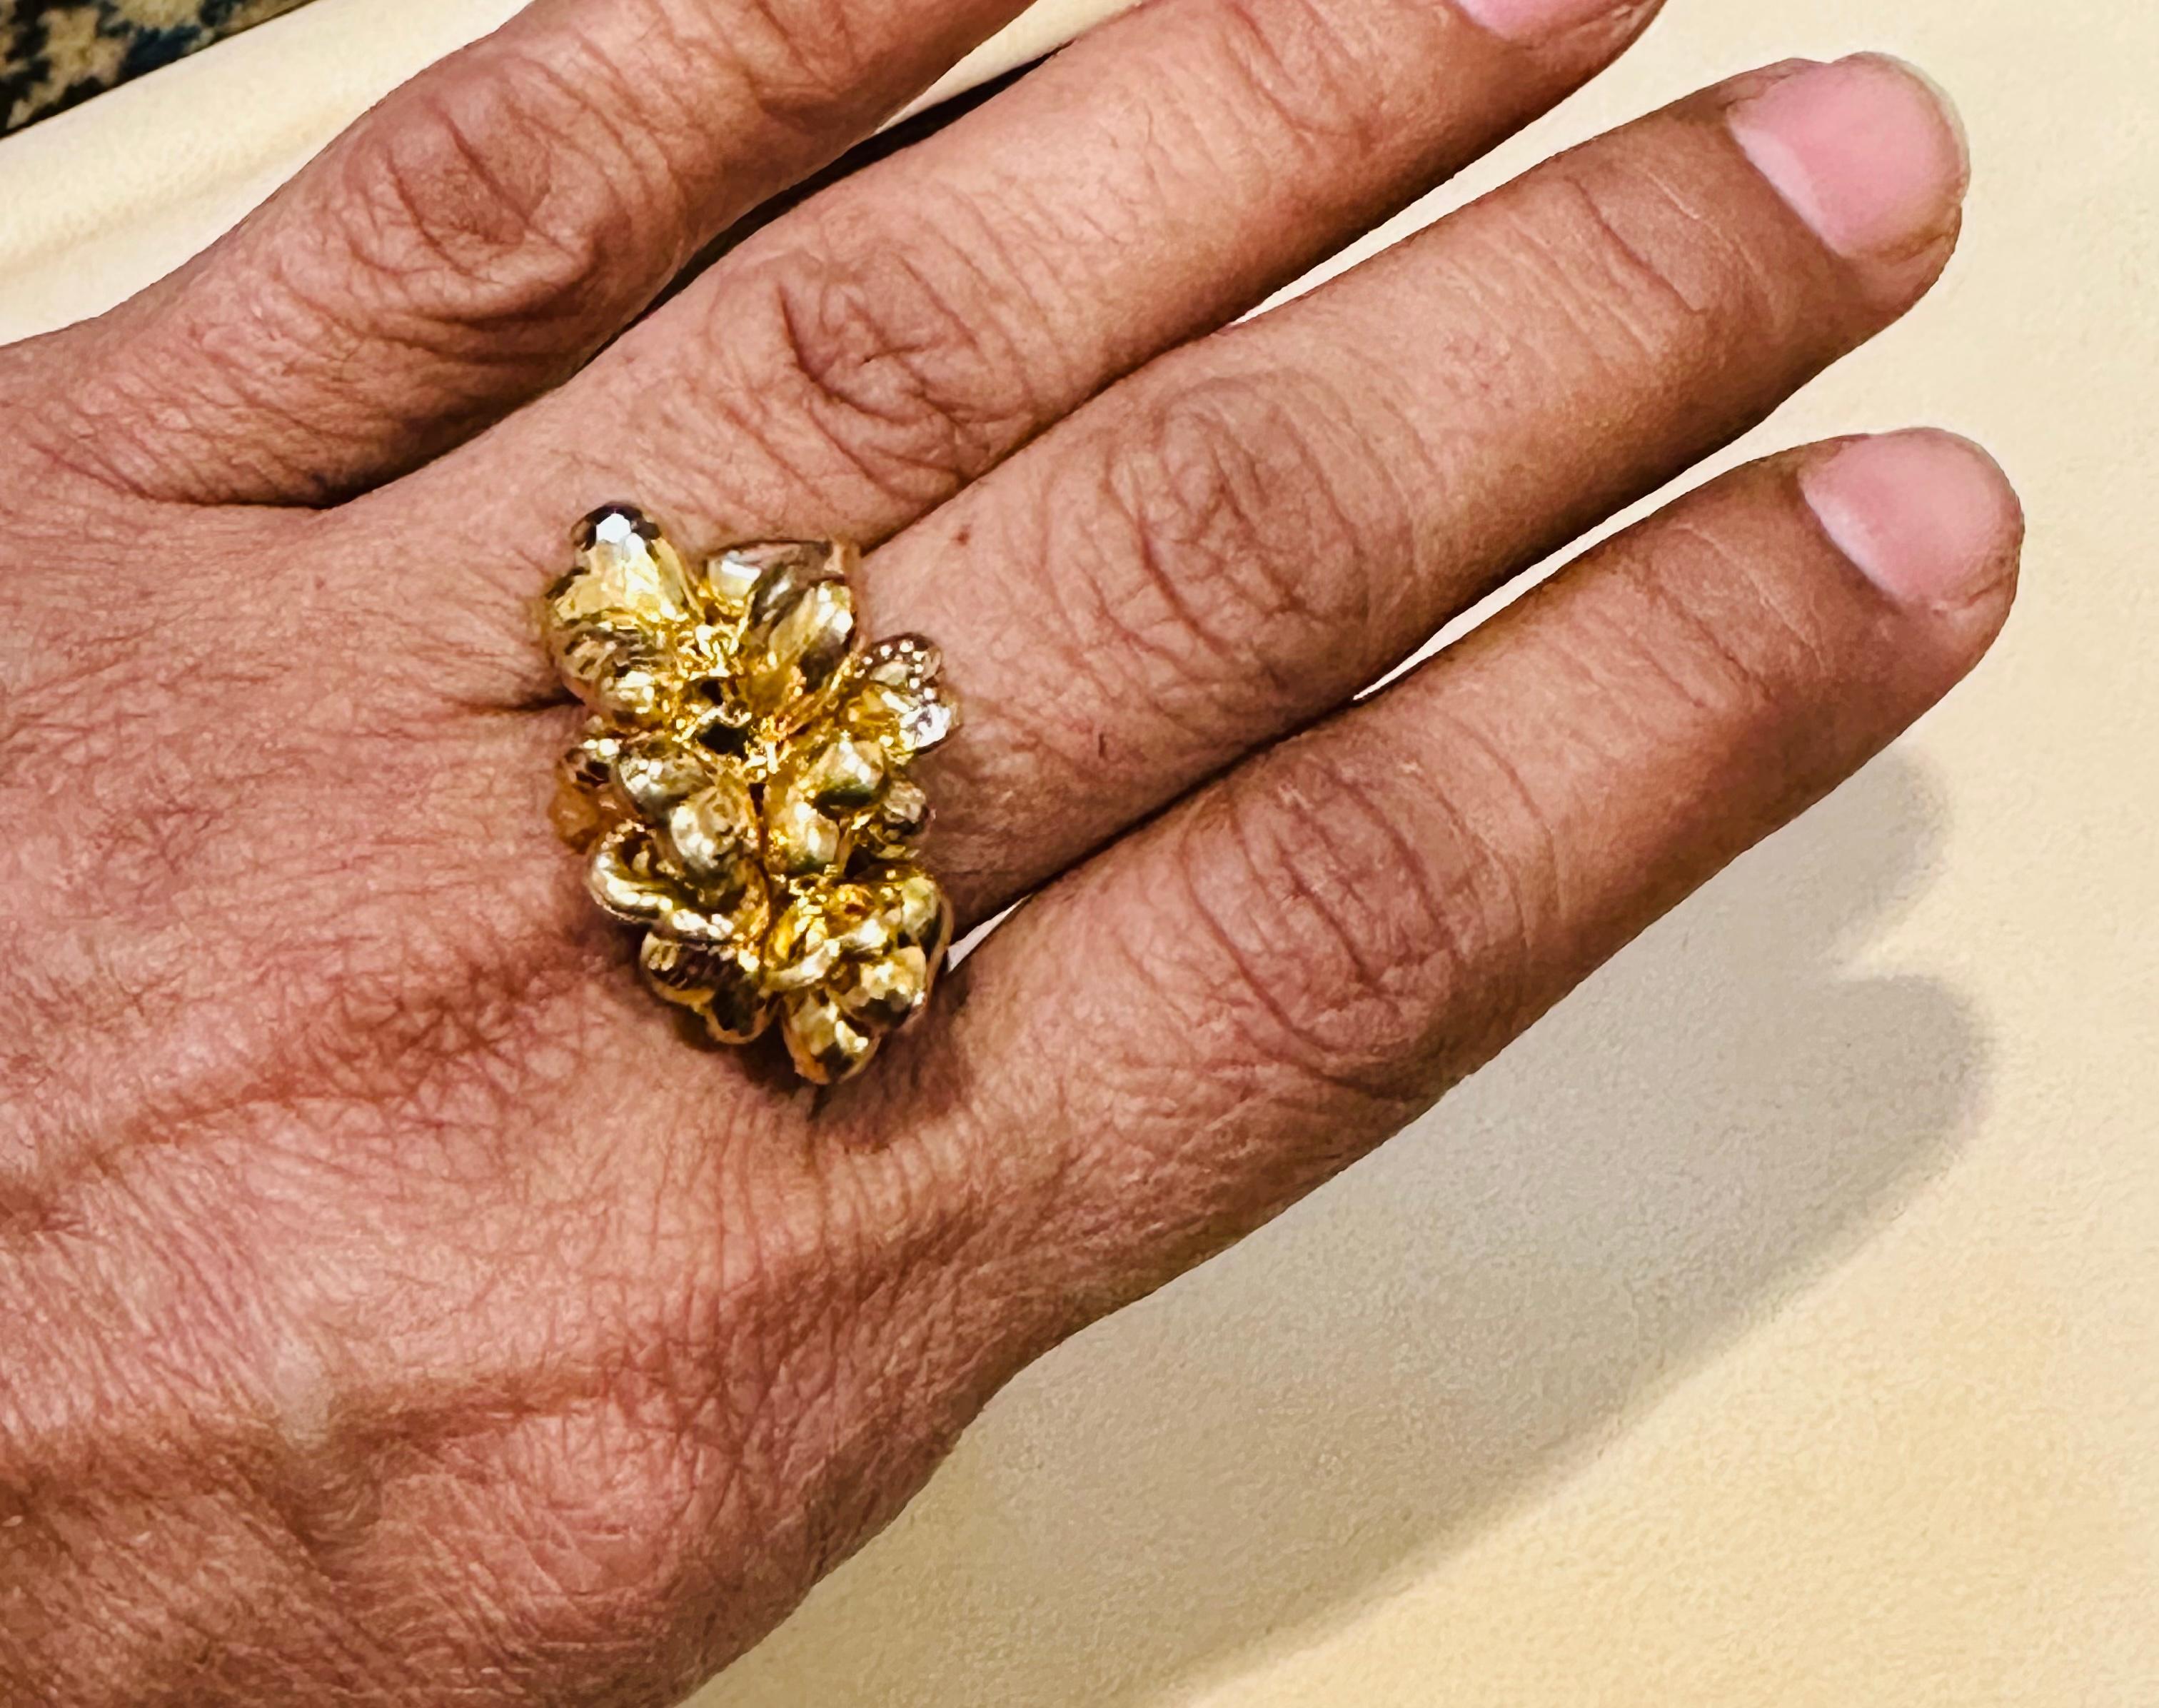 This 14 karat yellow gold ring features close to 20 different heart charms, all with unique shapes and bunched together on top of a band. This vintage ring is a beautiful piece of jewelry that boasts a stunning color and shine. The ring weighs 4.1